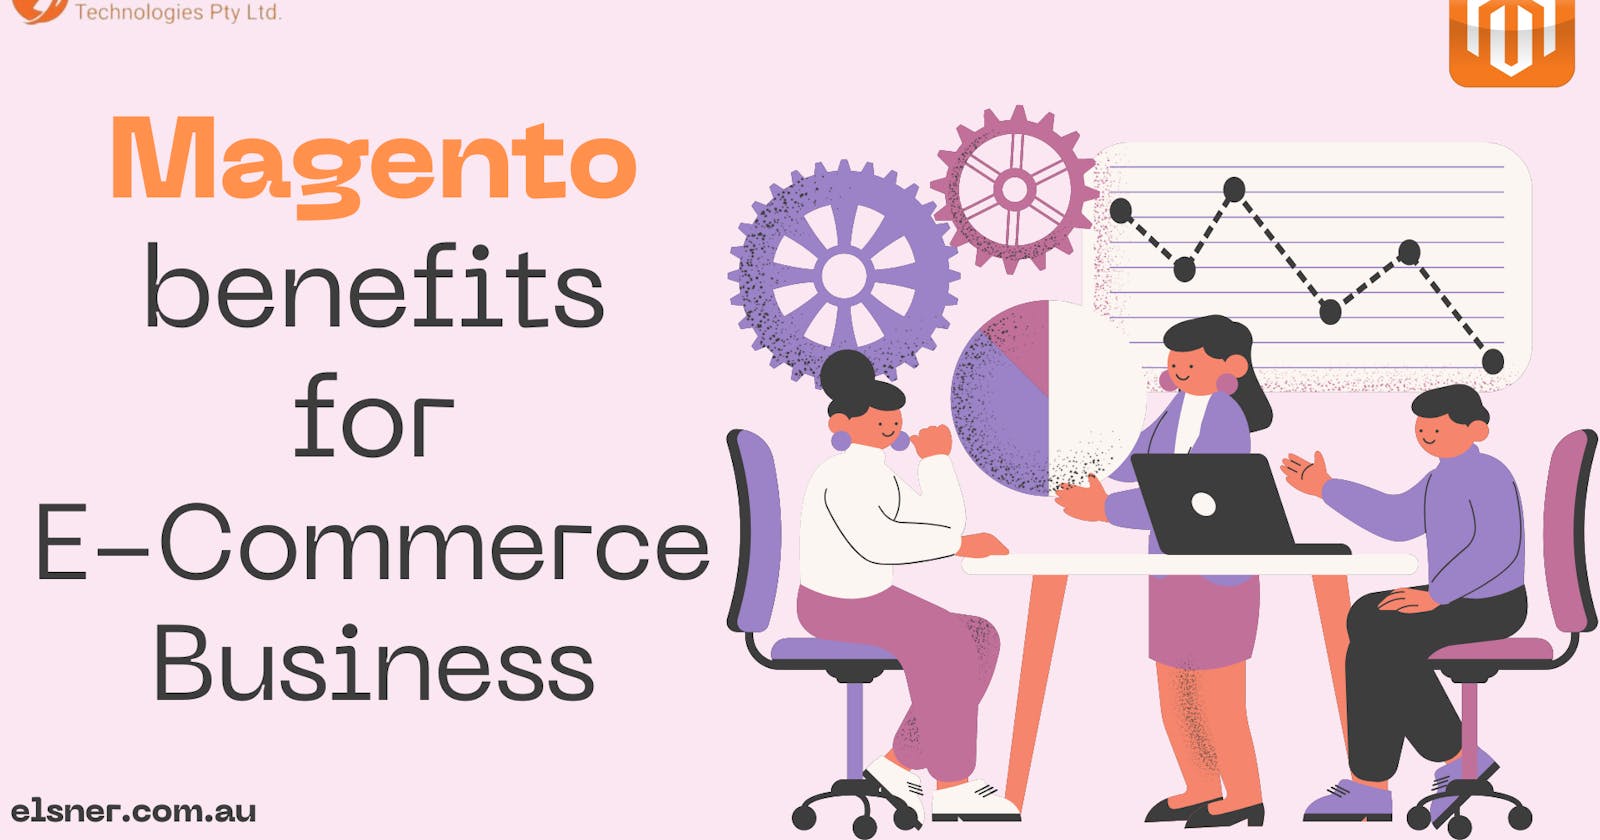 Key advantages of Magento: How do they benefit an e-commerce business?